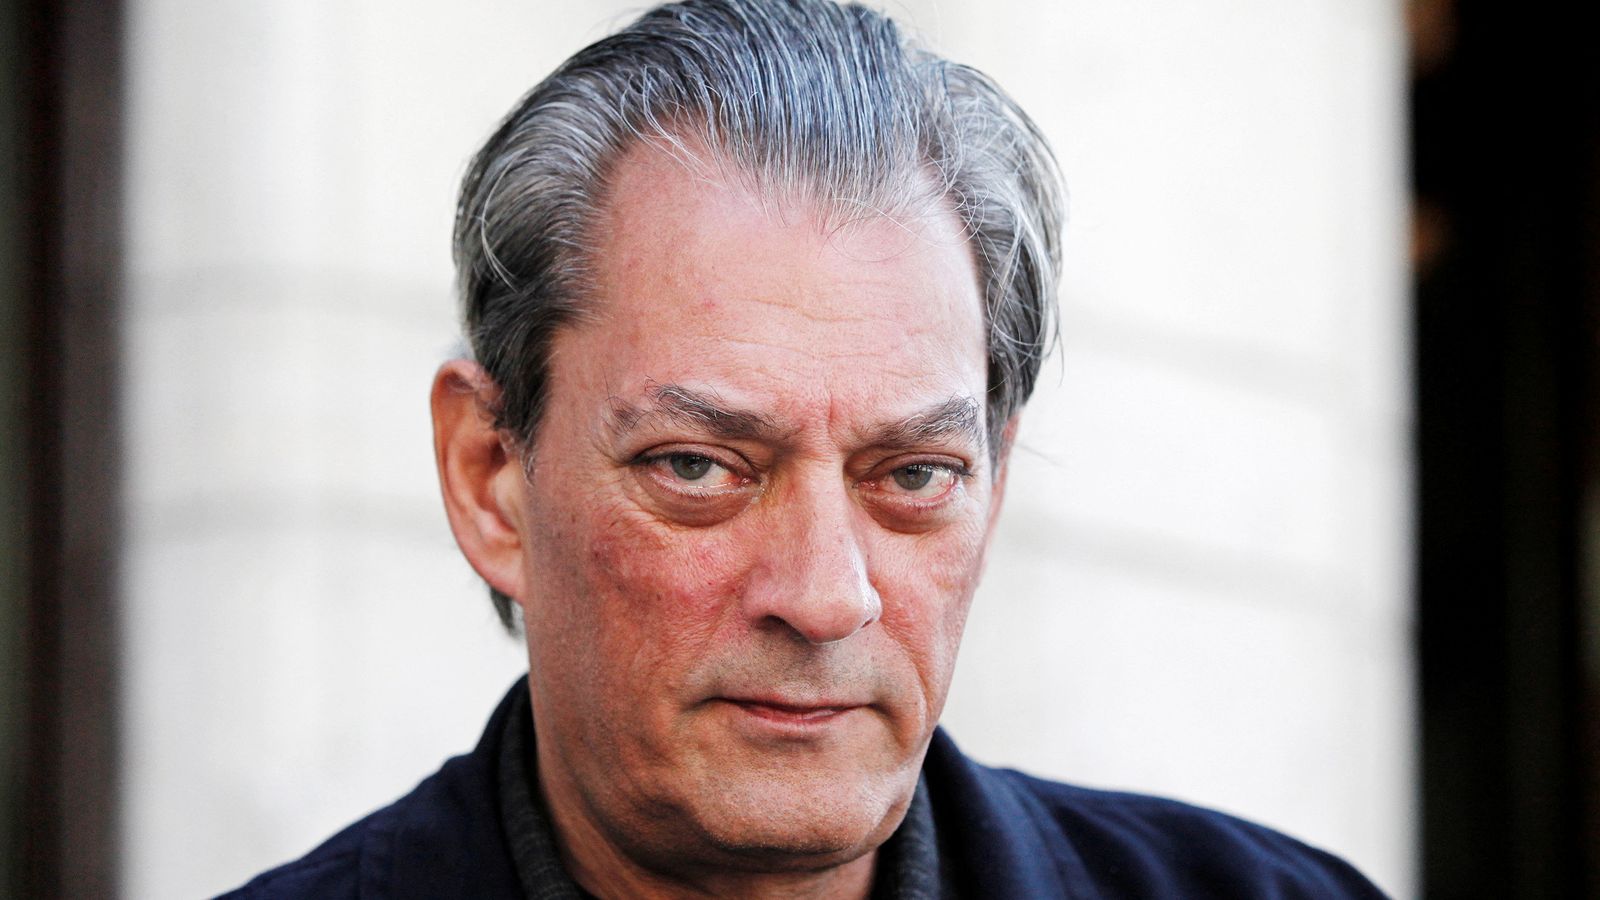 Paul Auster, author of New York Trilogy and 4 3 2 1, dies aged 77